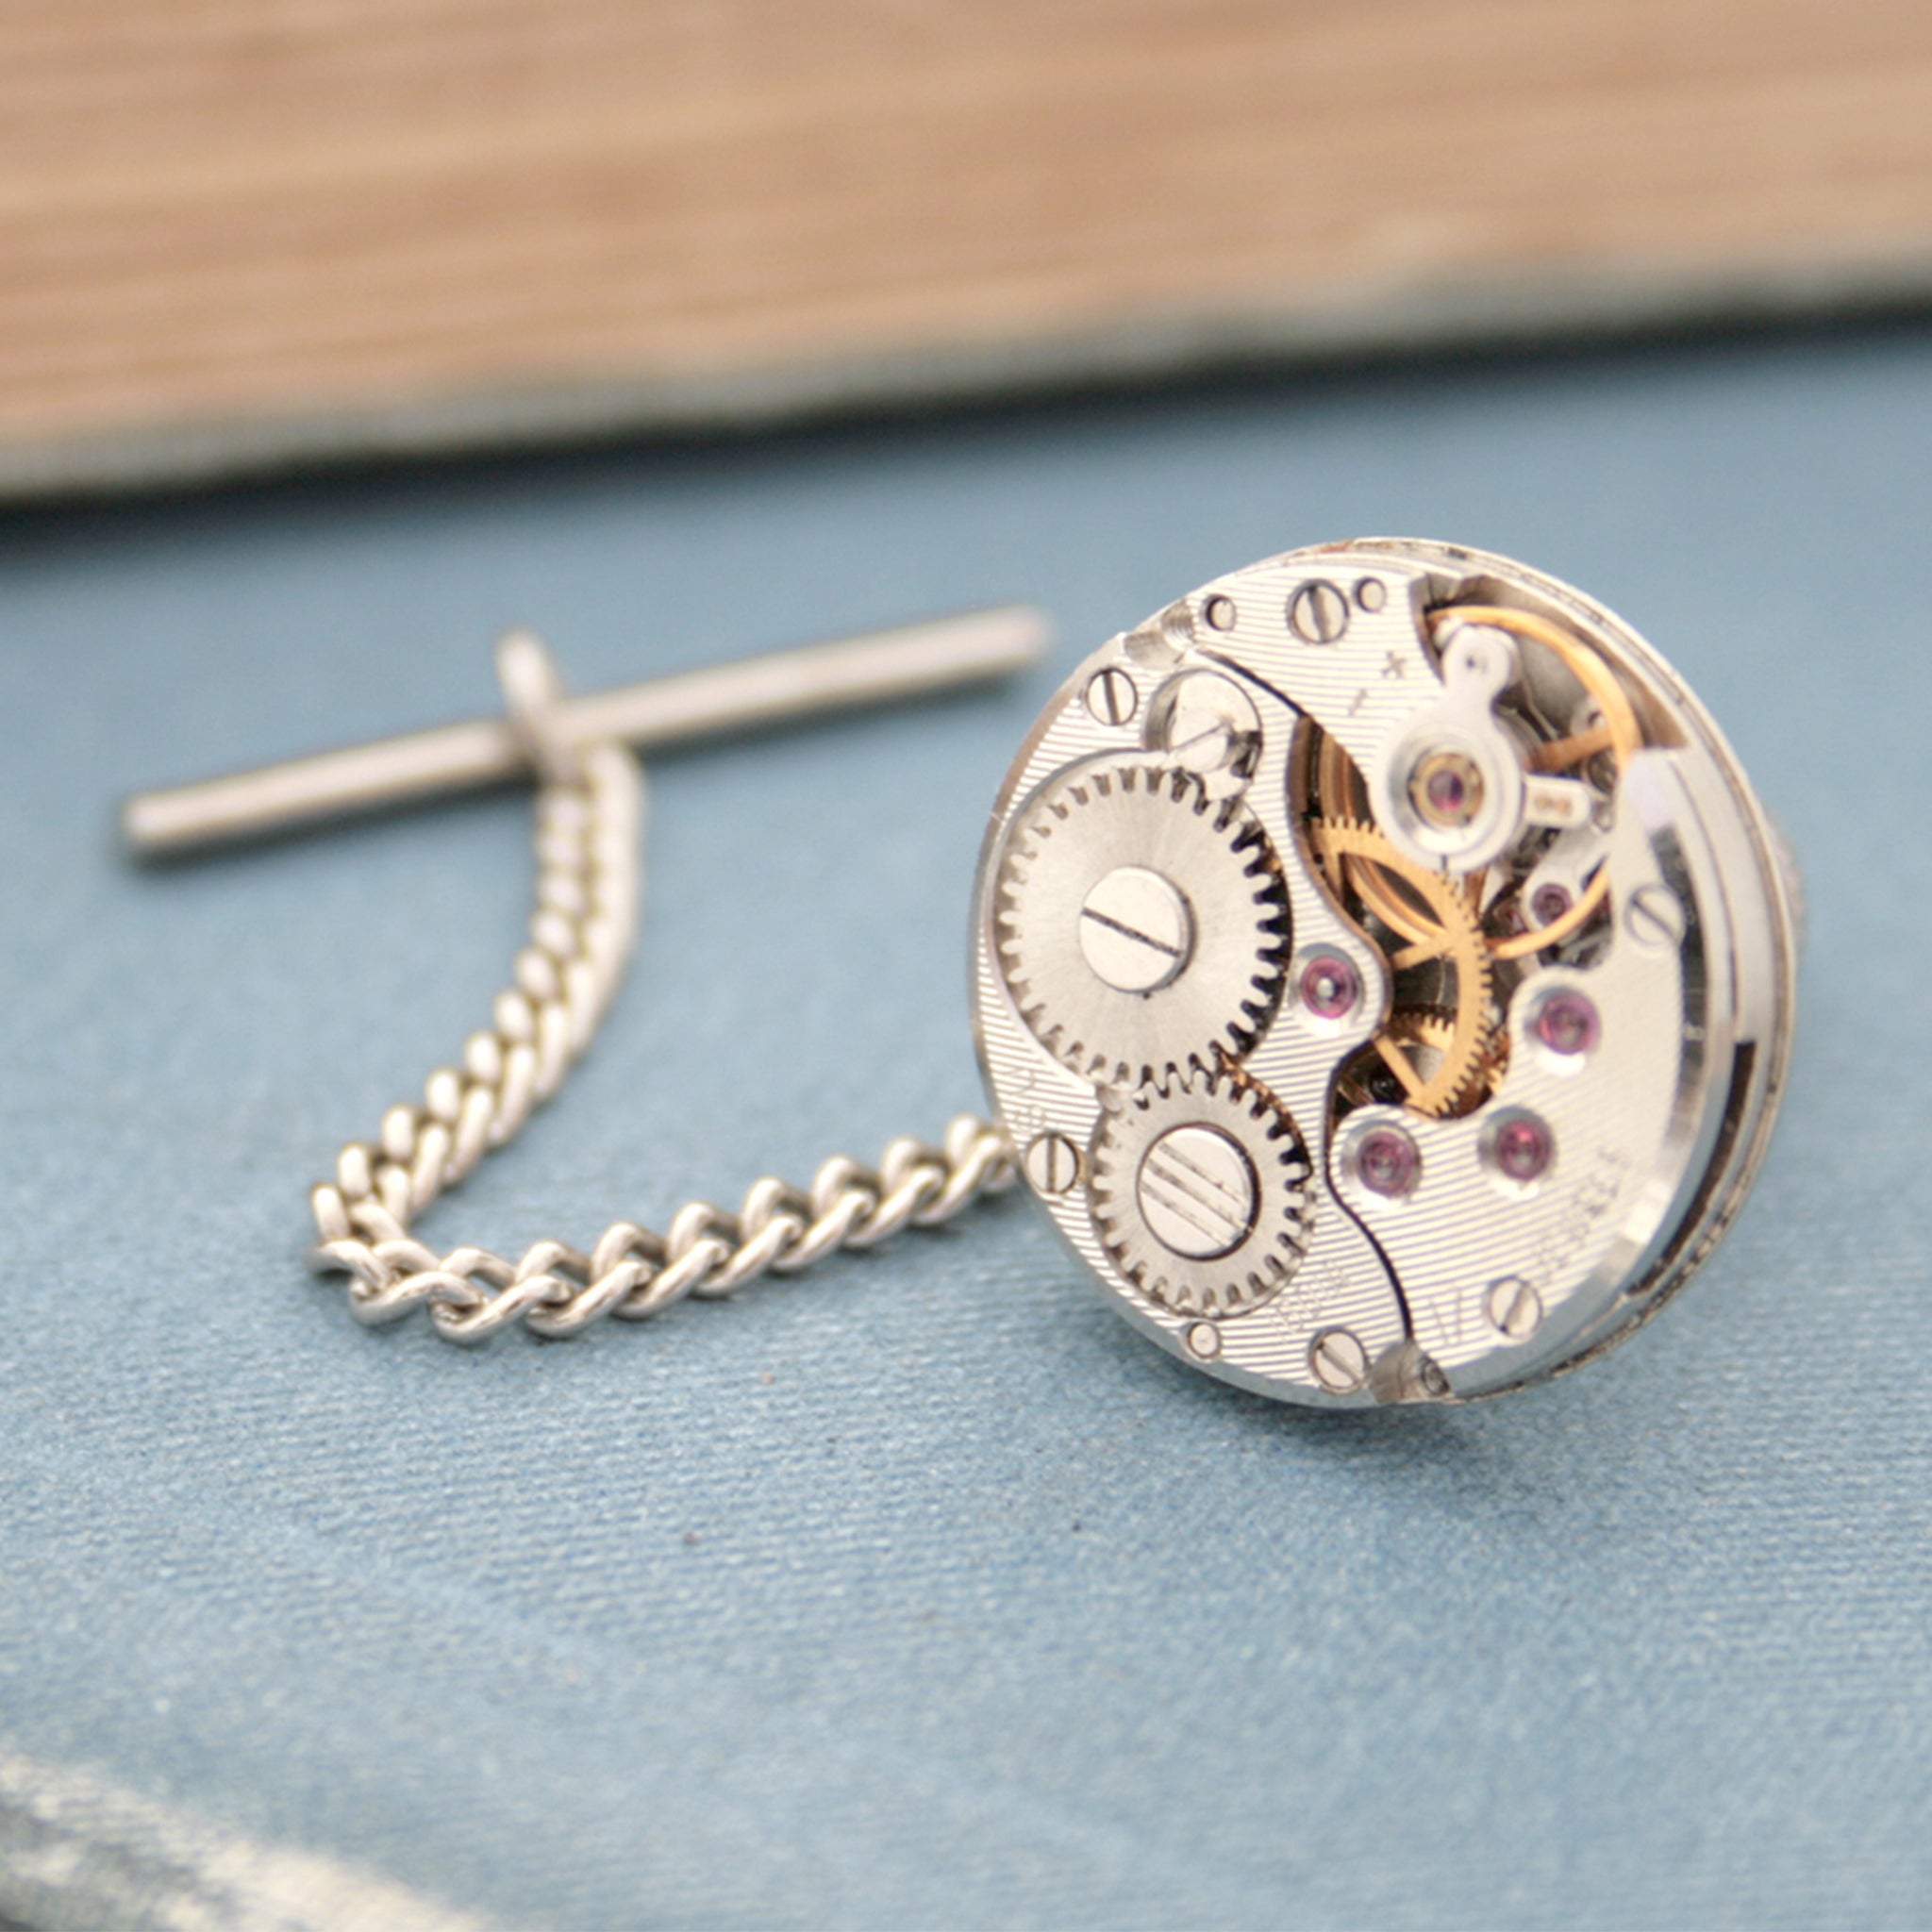 Tie tack with chain made of old watch movement